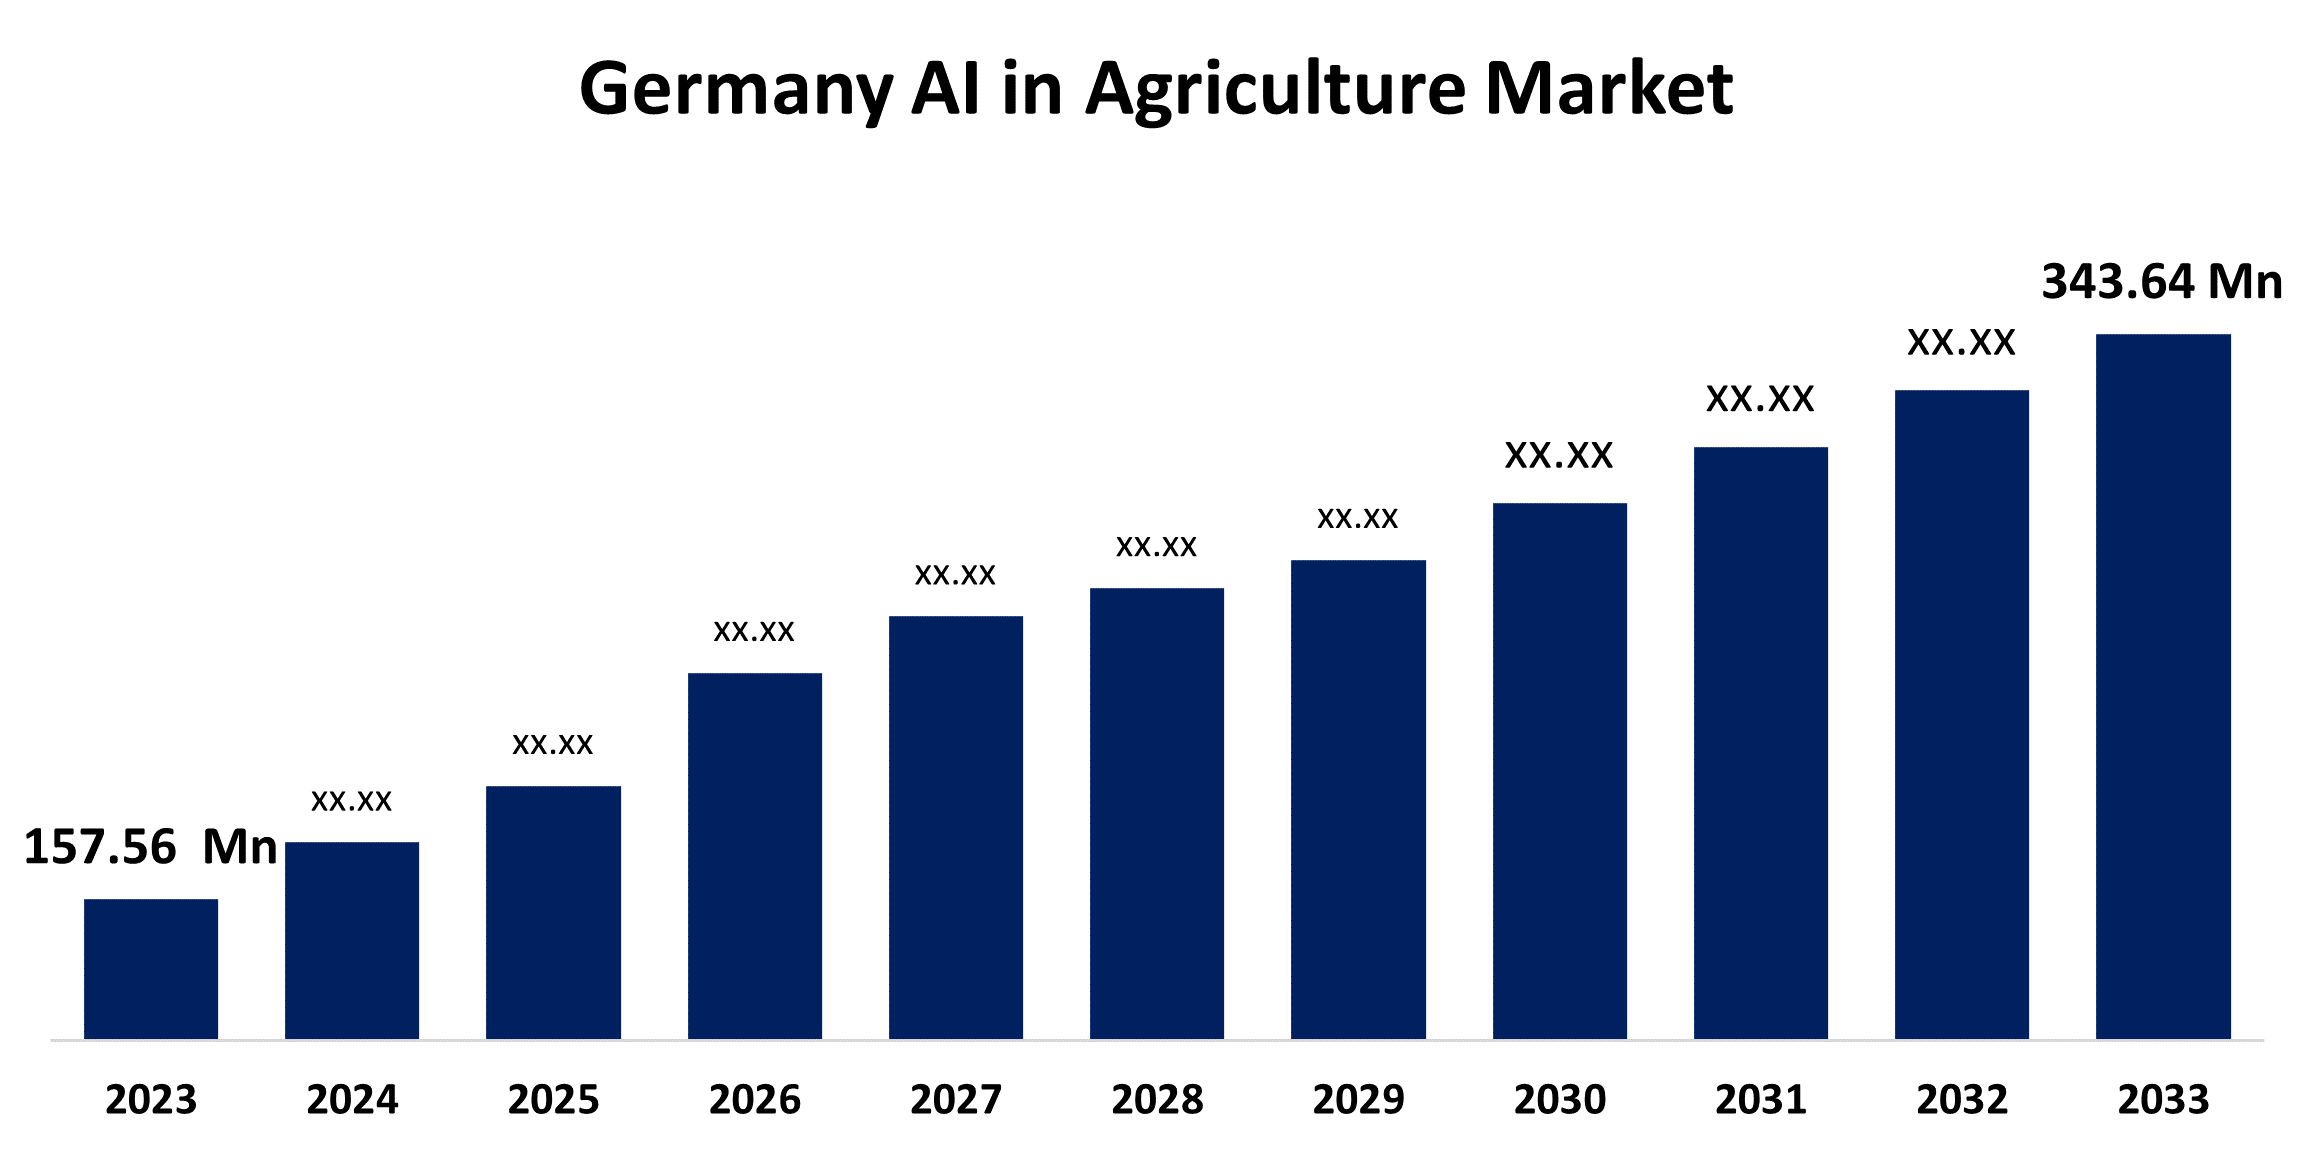 Germany AI in Agriculture Market